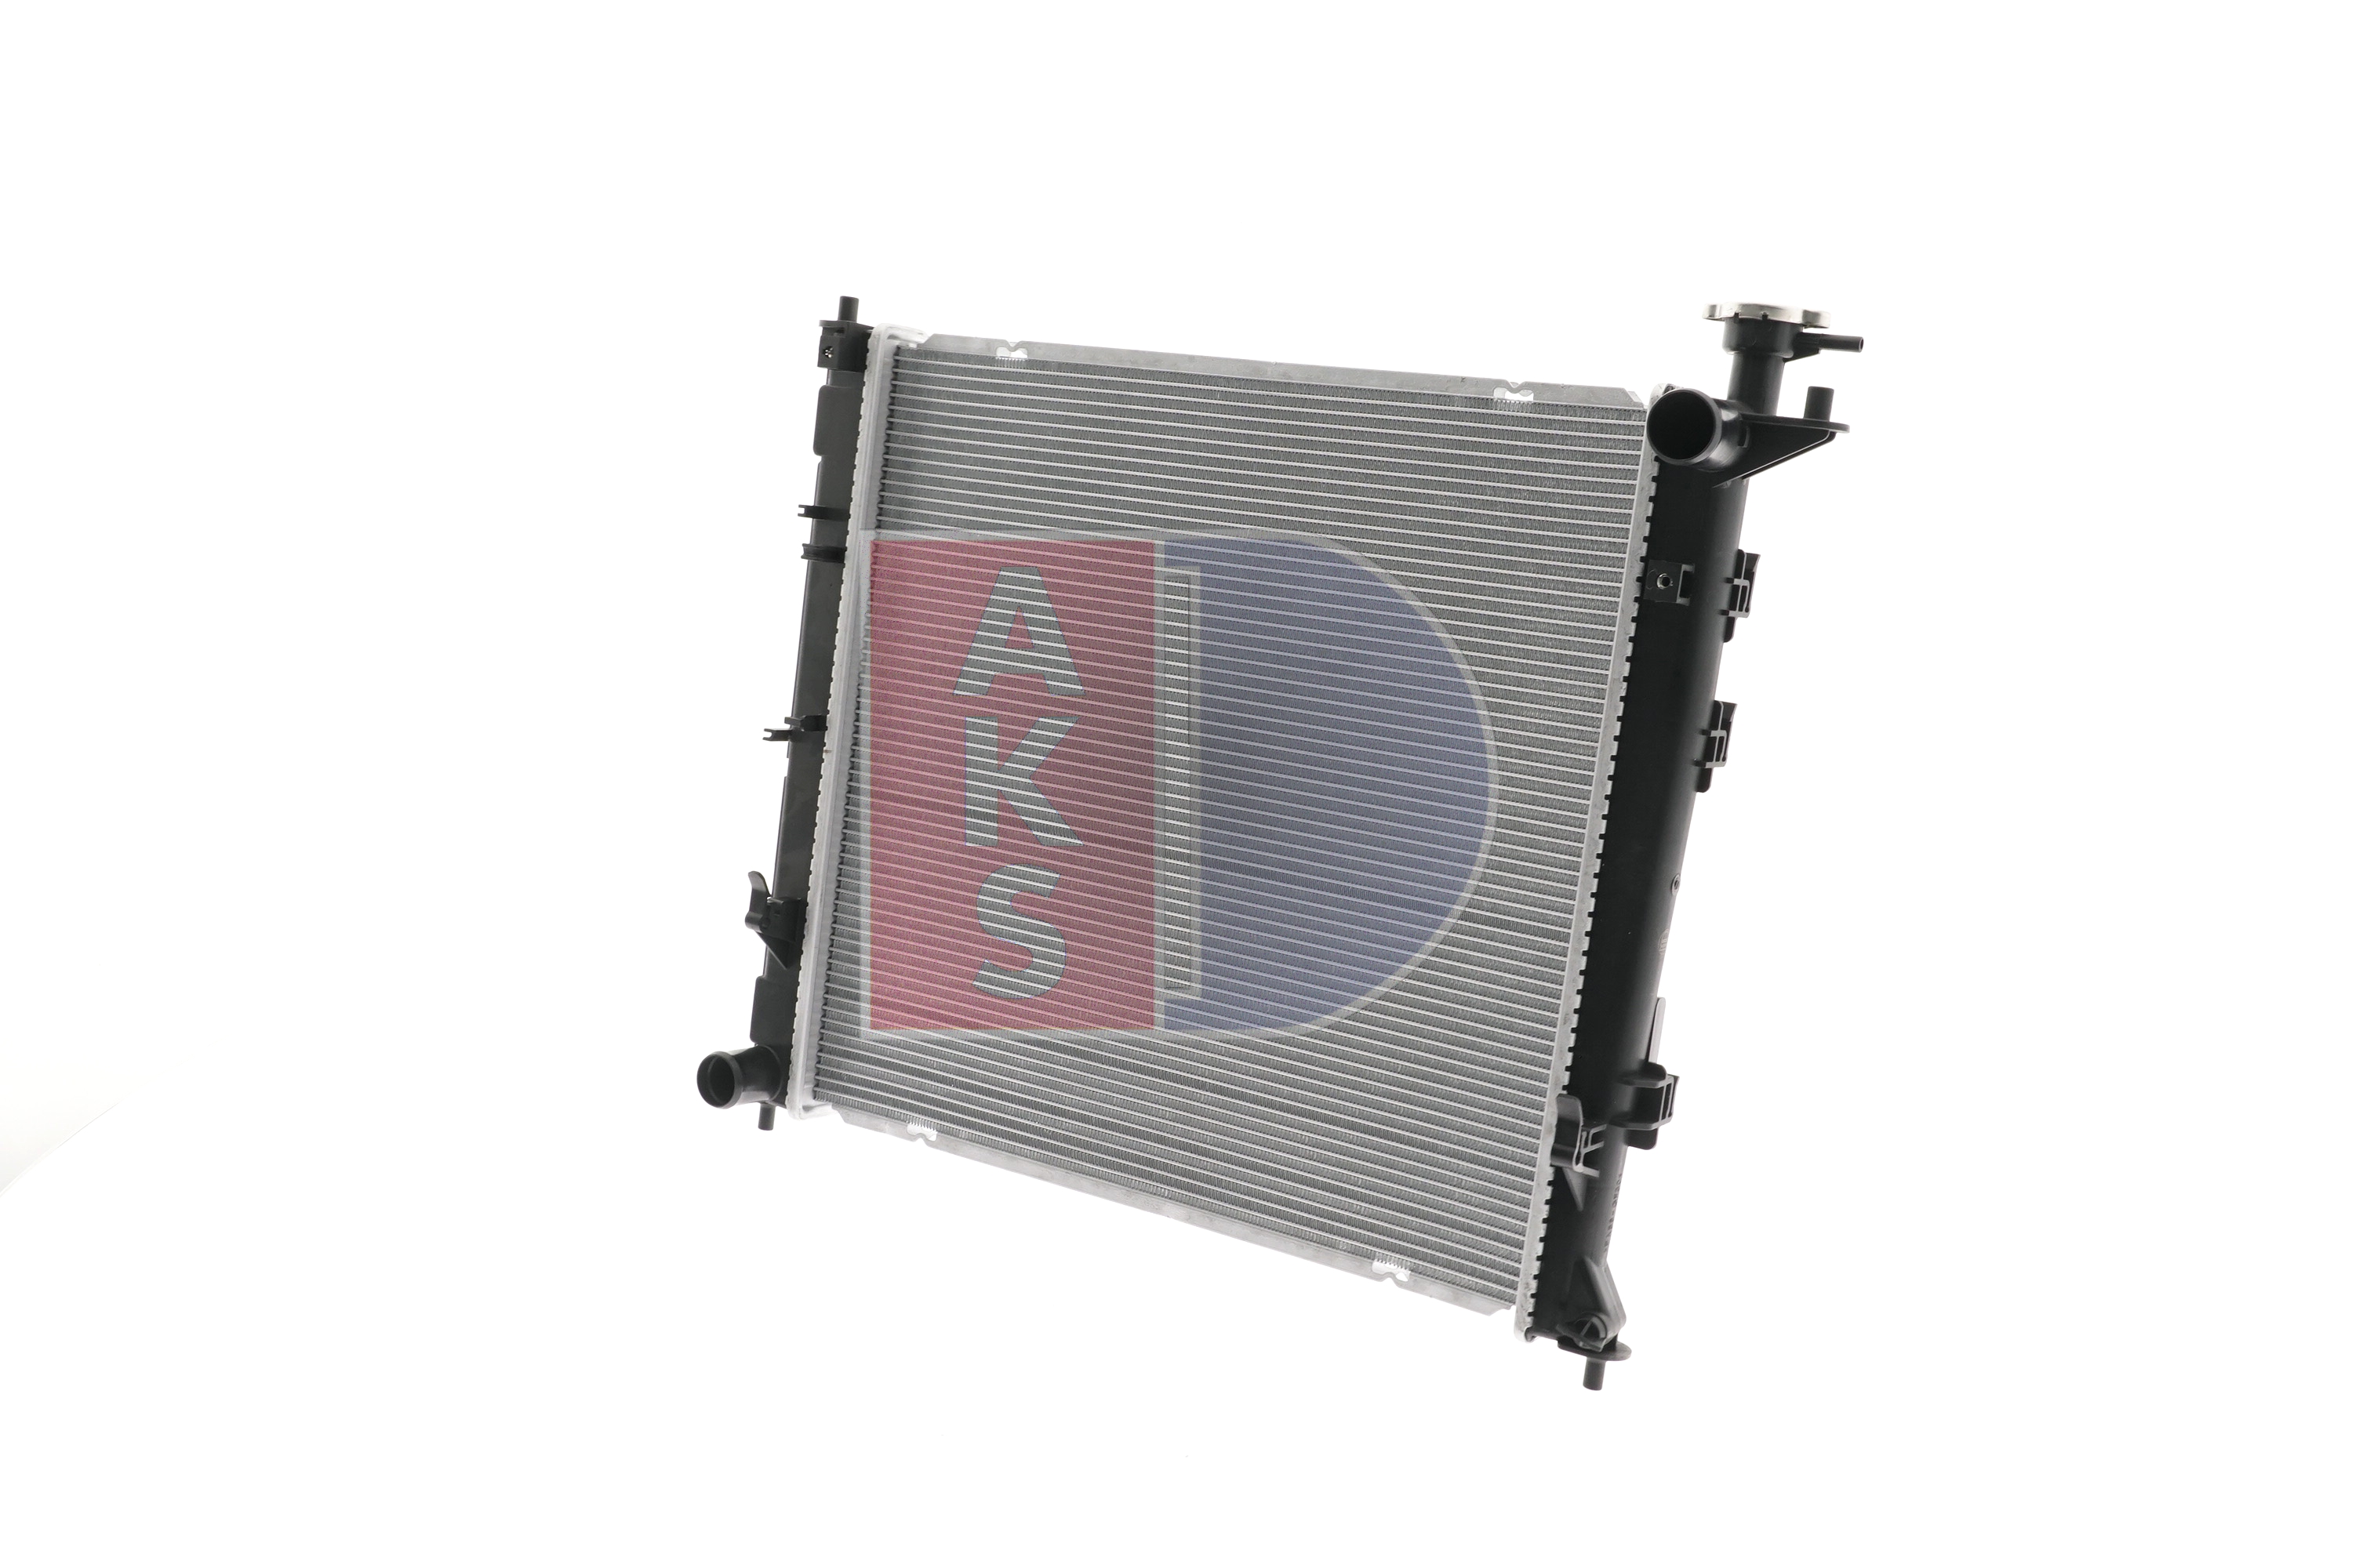 Radiator AKS DASIS Aluminium, for vehicles with/without air conditioning, 485 x 480 x 18 mm, Manual Transmission, Brazed cooling fins - 560129N